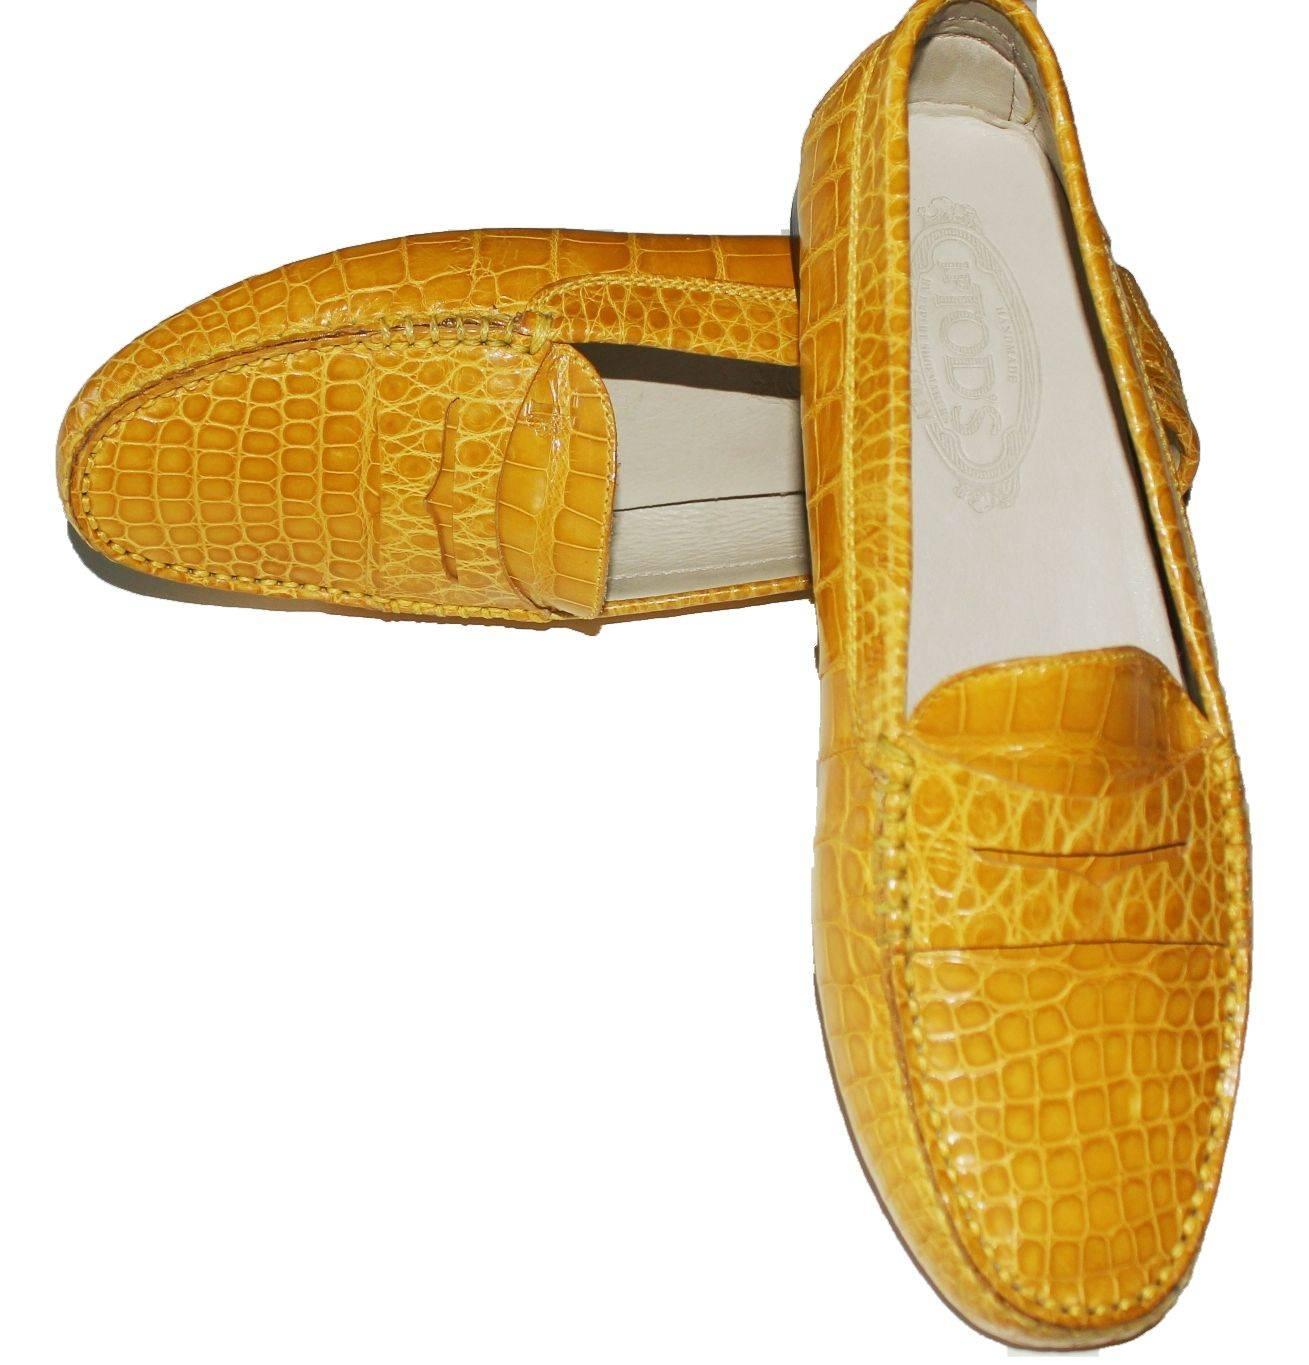 AMAZING TOD'S ALLIGATOR SKIN MOCCASINS

RARE FIND 

RETAIL PRICE 5500$ PLUS TAXES

Condition: New with Tod's dust bag

DETAILS: 
A TOD'S signature piece that will last you for years
Pure luxury
Beautiful exotic skin real alligator leather